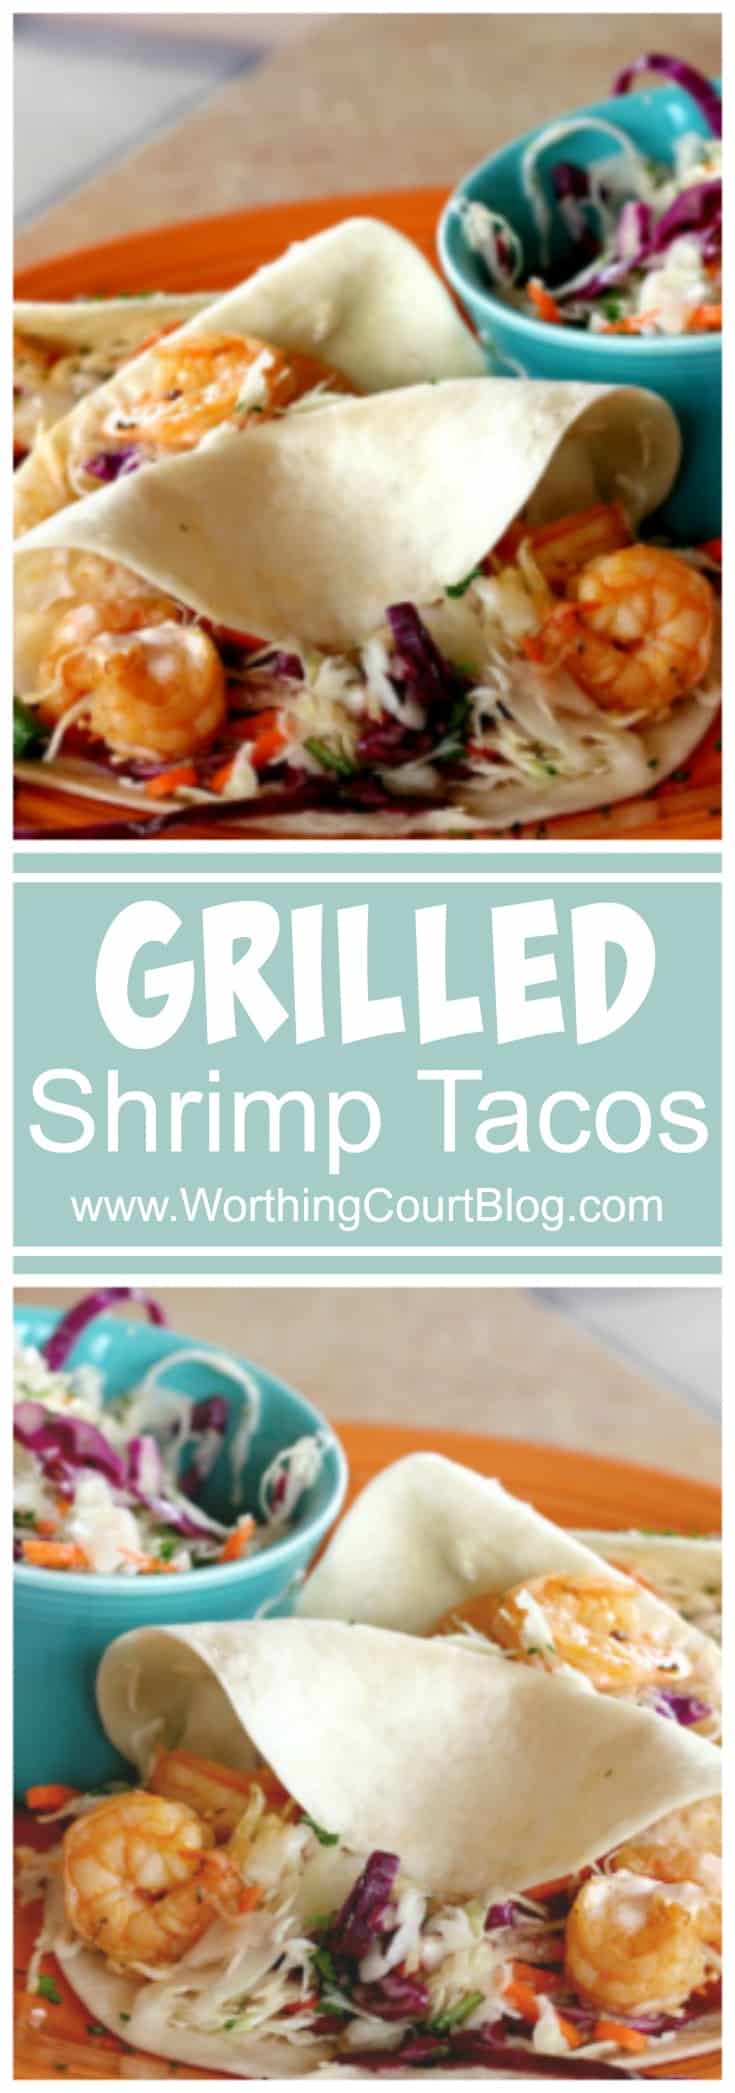 Grilled Shrimp Tacos by Worthing Court